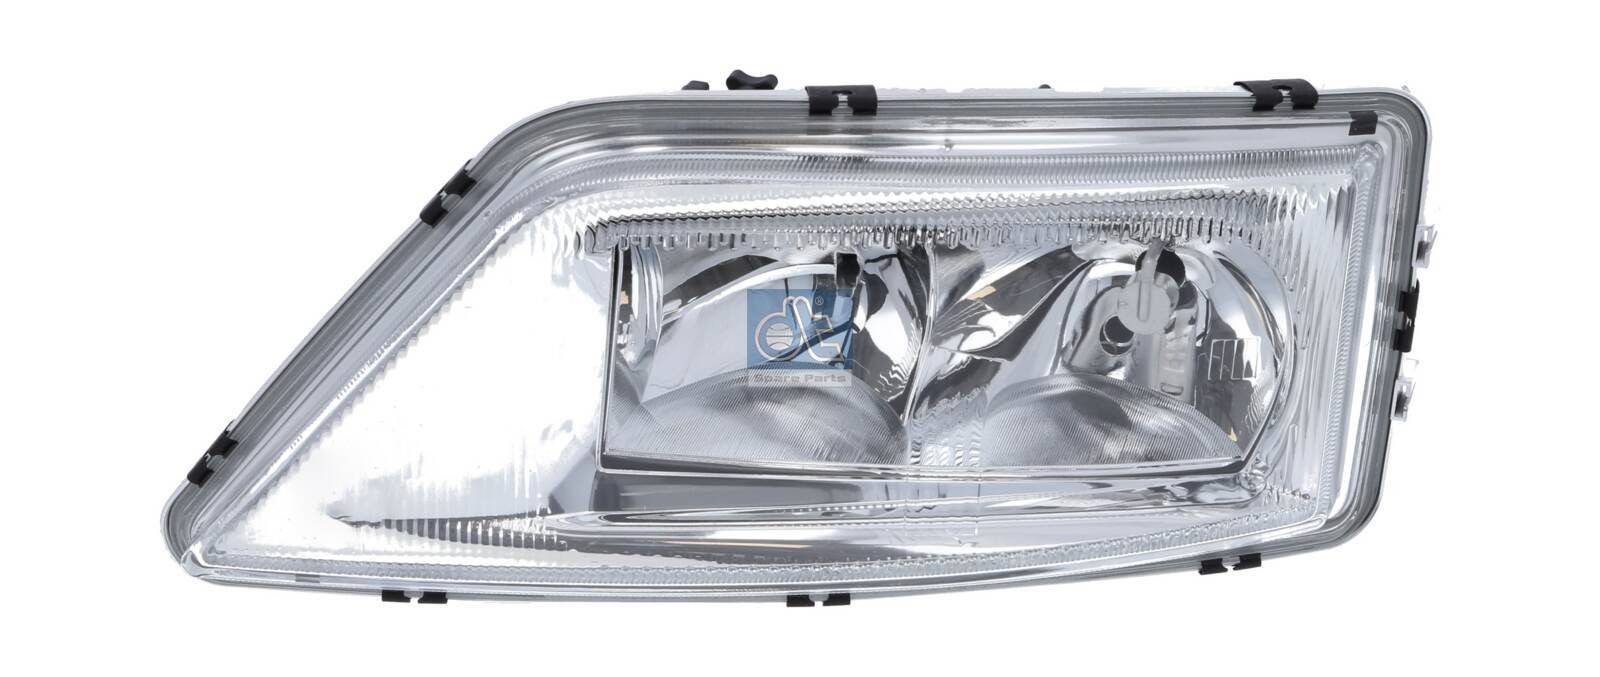 0 301 160 001 DT Spare Parts 4.66204 Headlight A000 540 0154